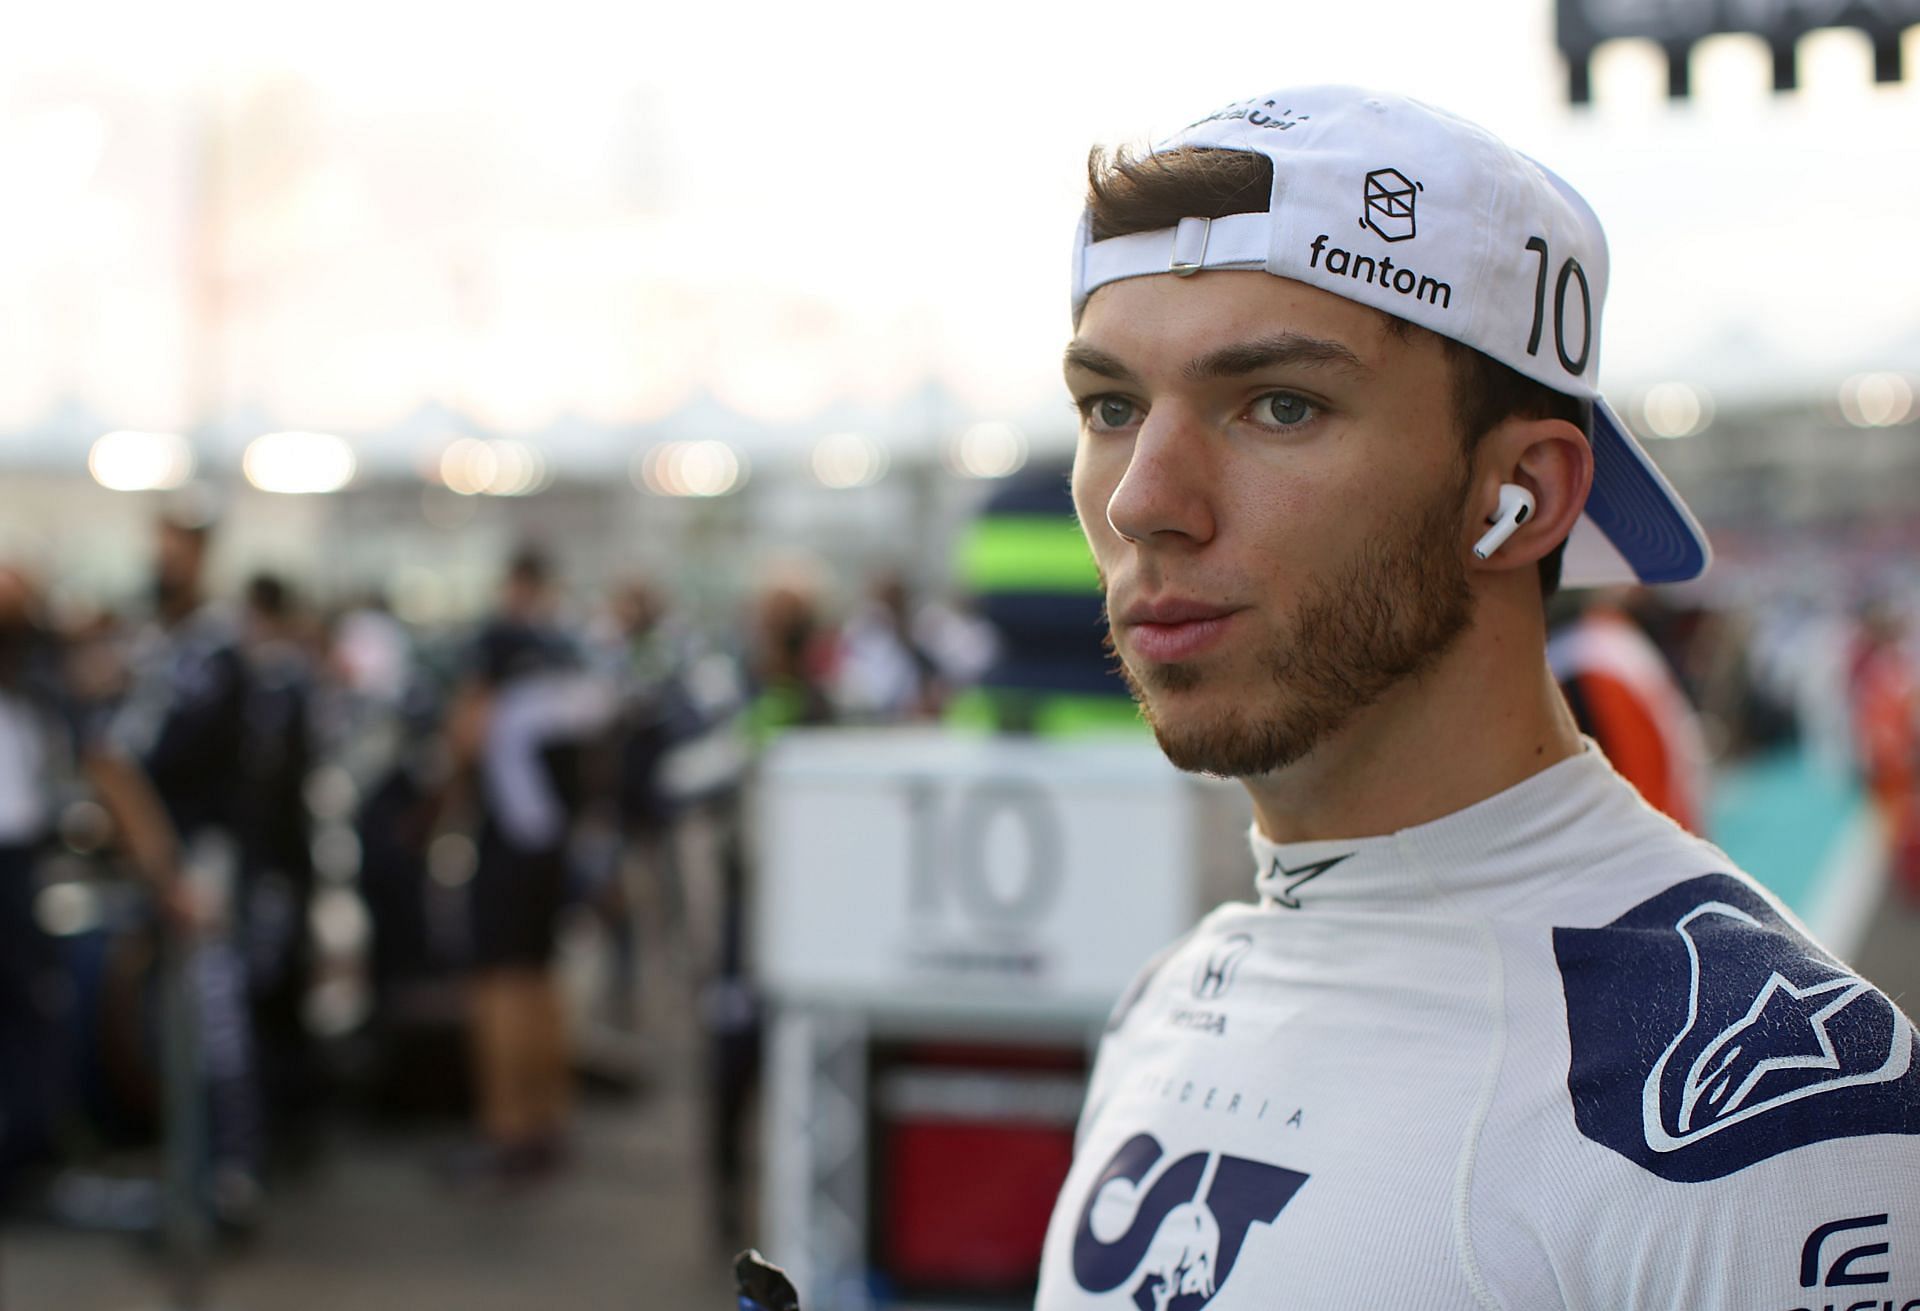 Pierre Gasly at the F1 Grand Prix of Abu Dhabi